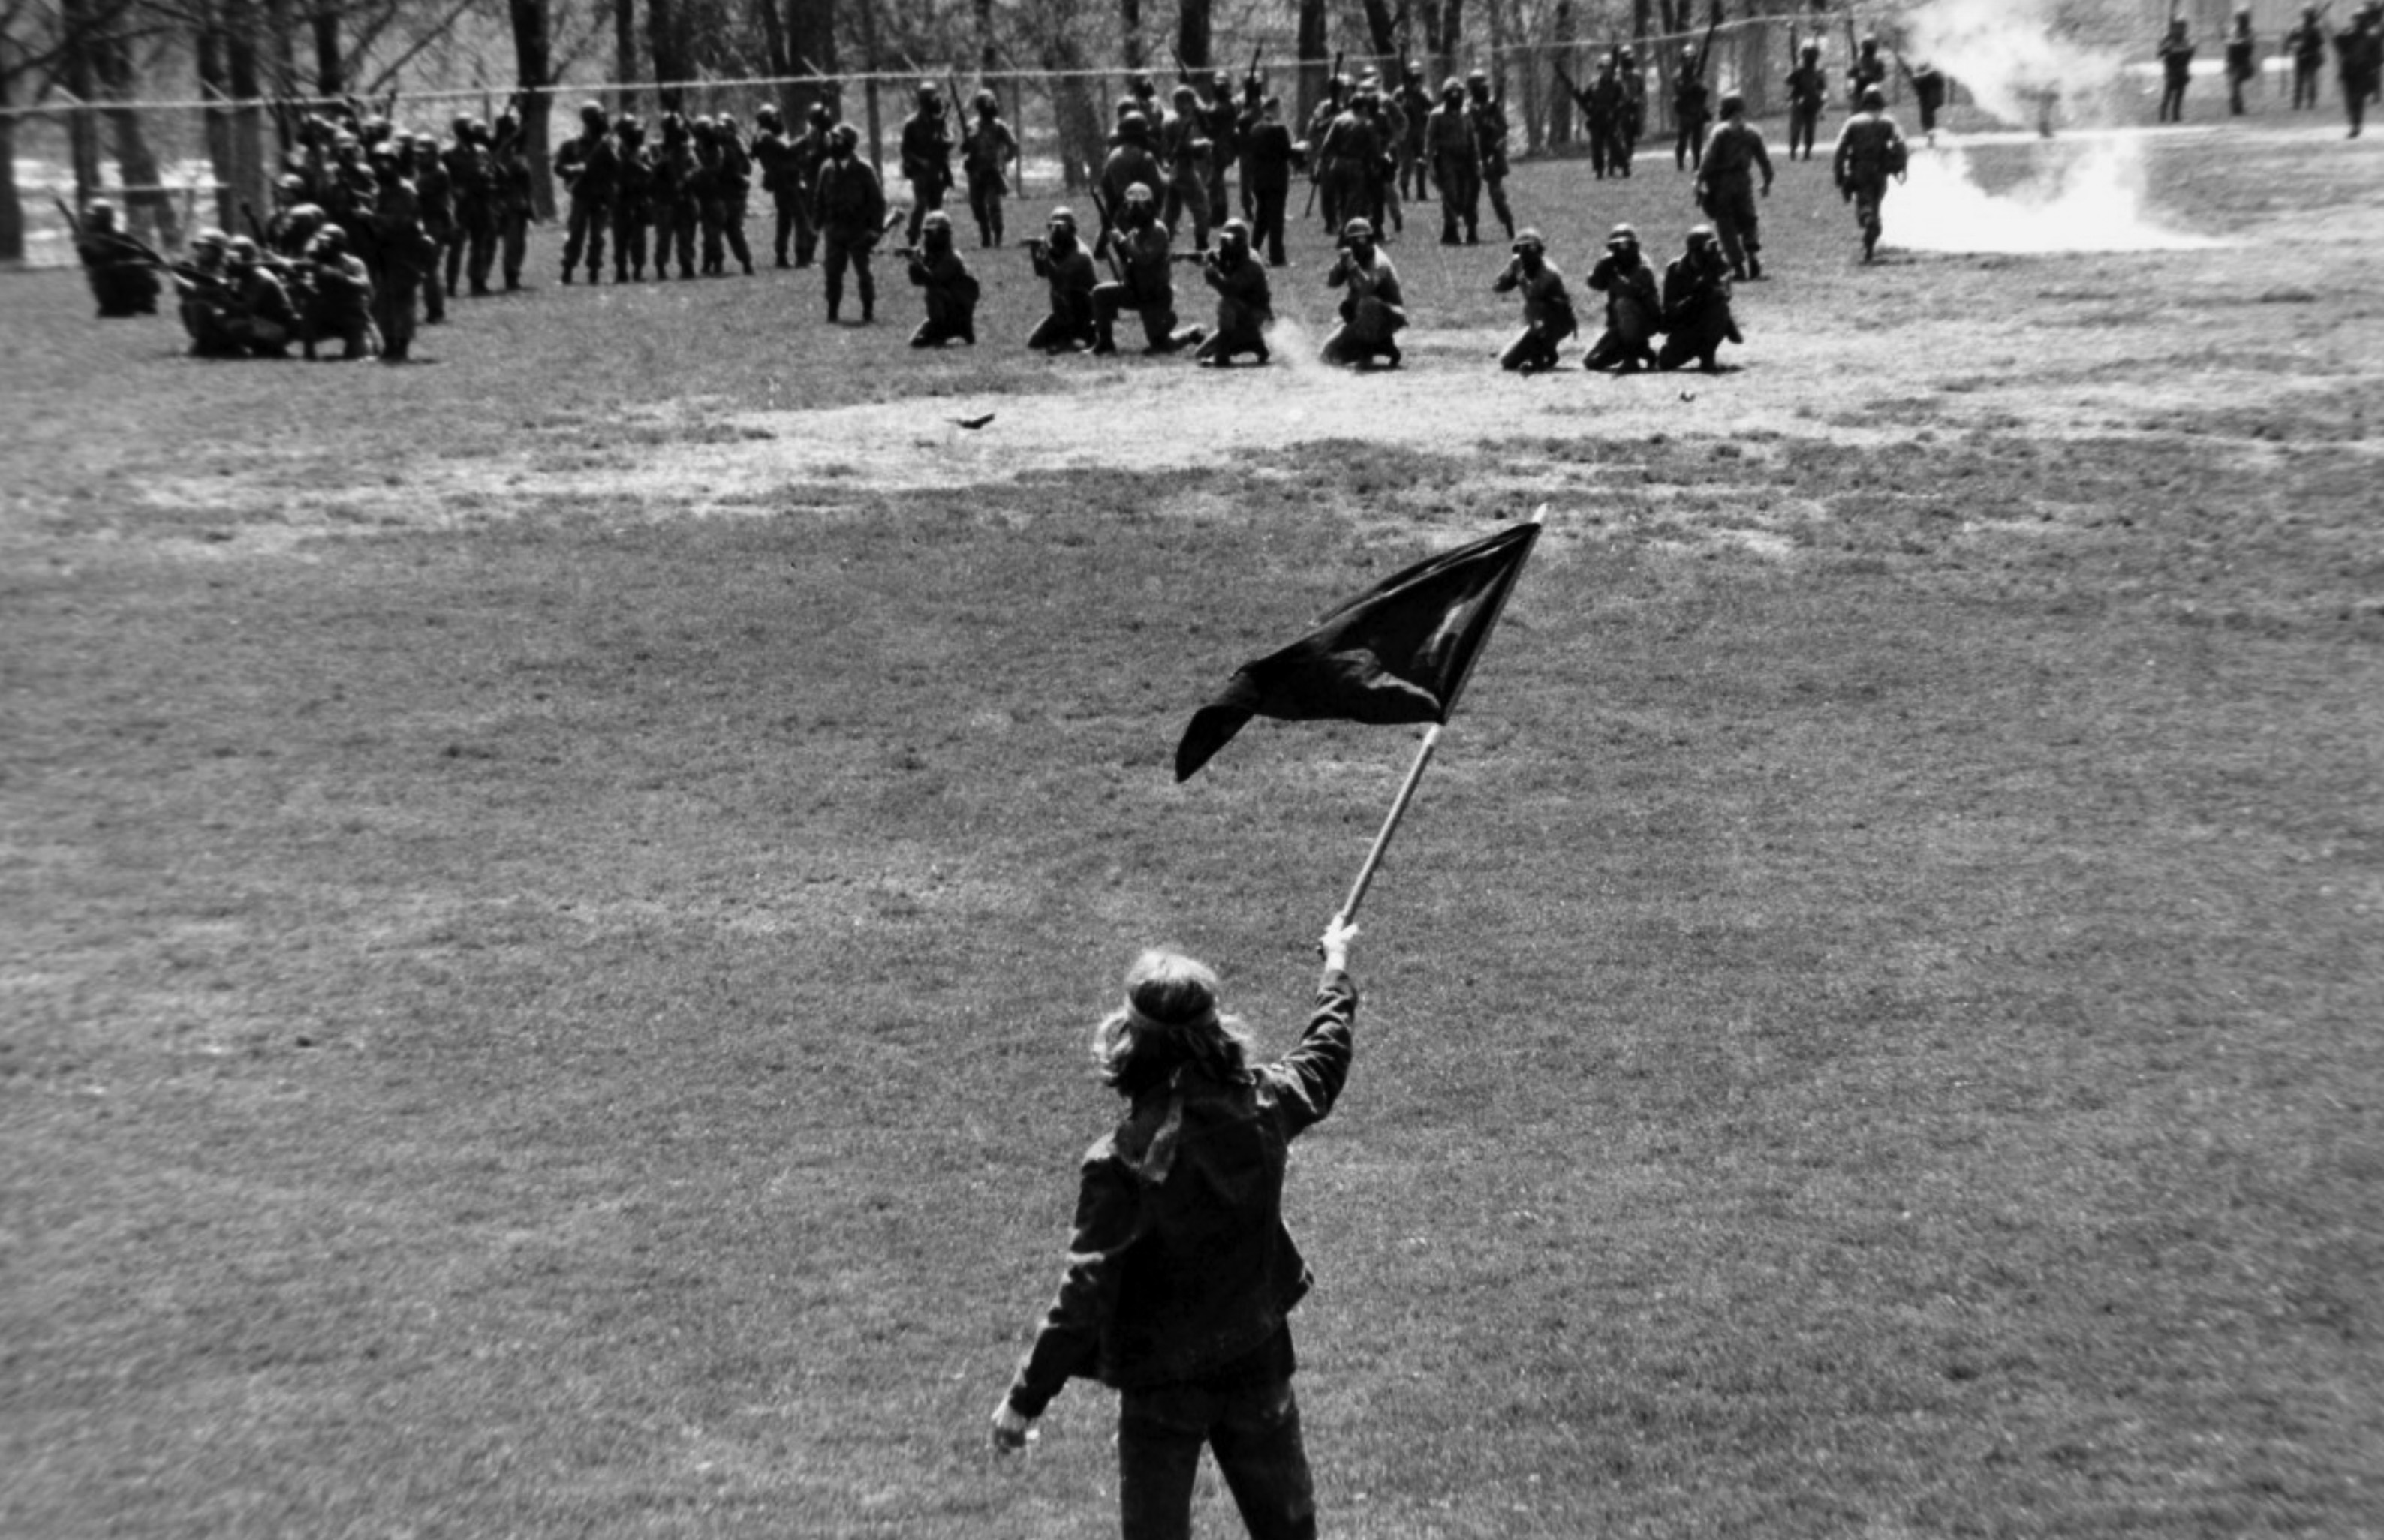 I have great pride in the revolt:' Kent State University shooting victim Alan Canfora recounts events leading to May 4, 1970 - cleveland.com